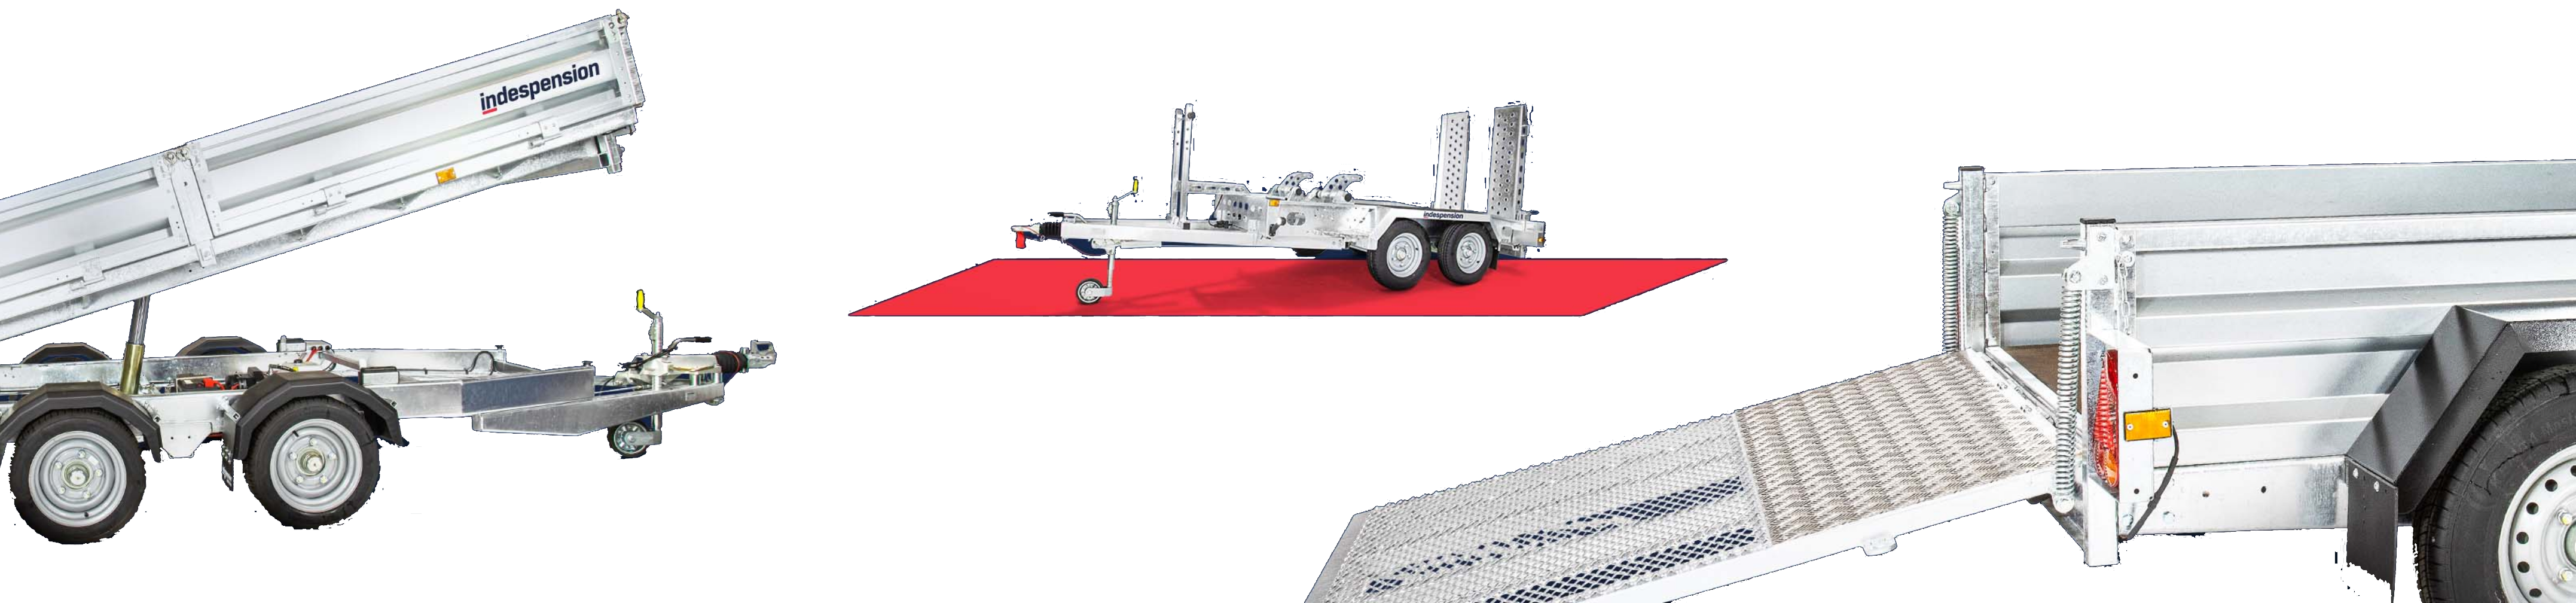 A range of trailers available at Indespension